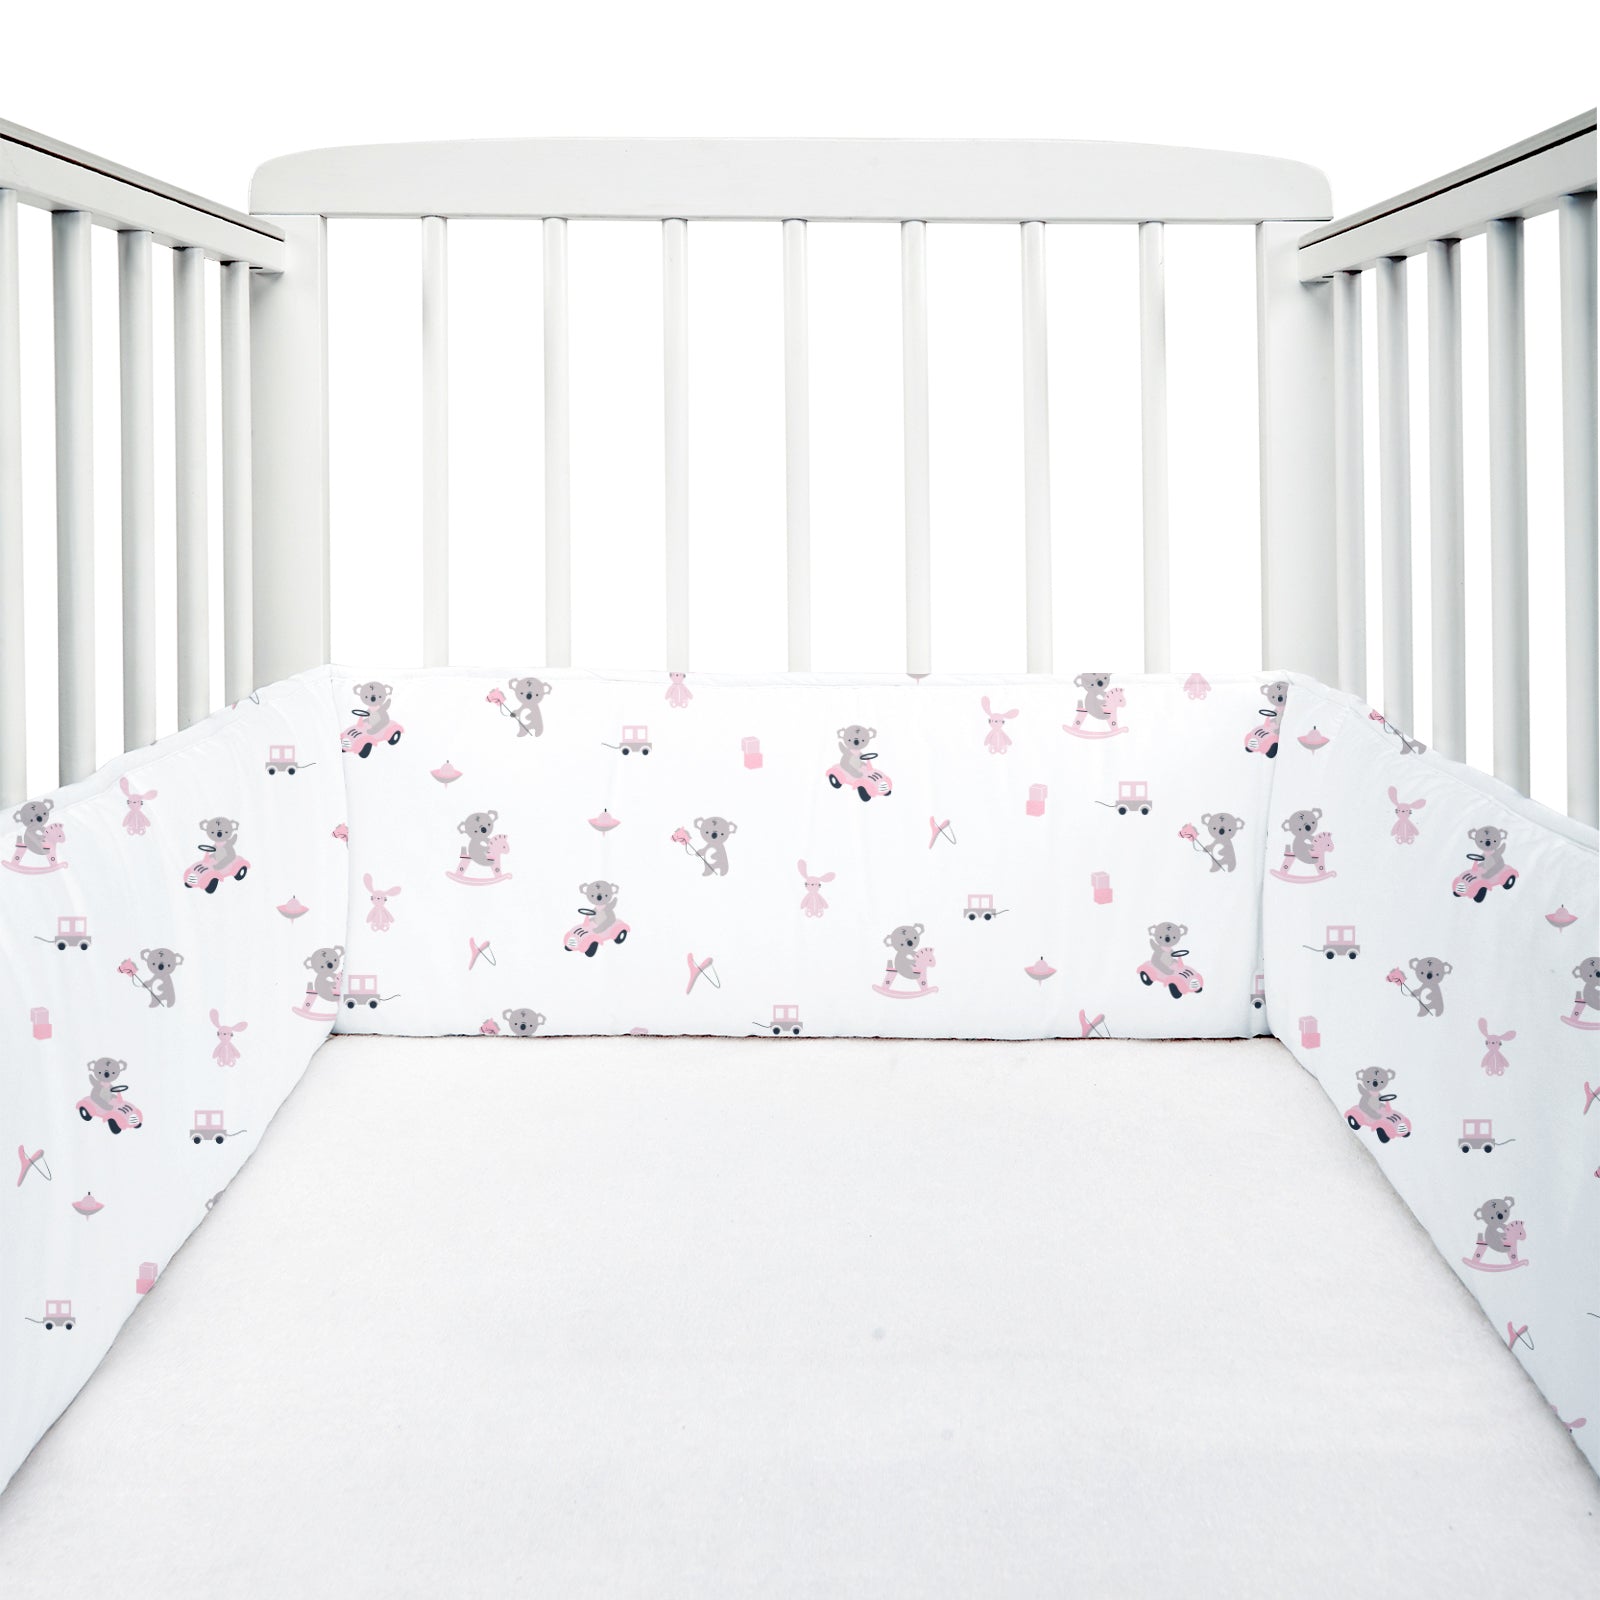 The White Cradle Baby Safe Cot Bumper Pad, Fits all Standard Cribs, Thick Padded Protective Liner for Child Nursery Bed, Soft Organic Cotton Fabric, Breathable, Non-Allergenic - Pink Koala with Horse